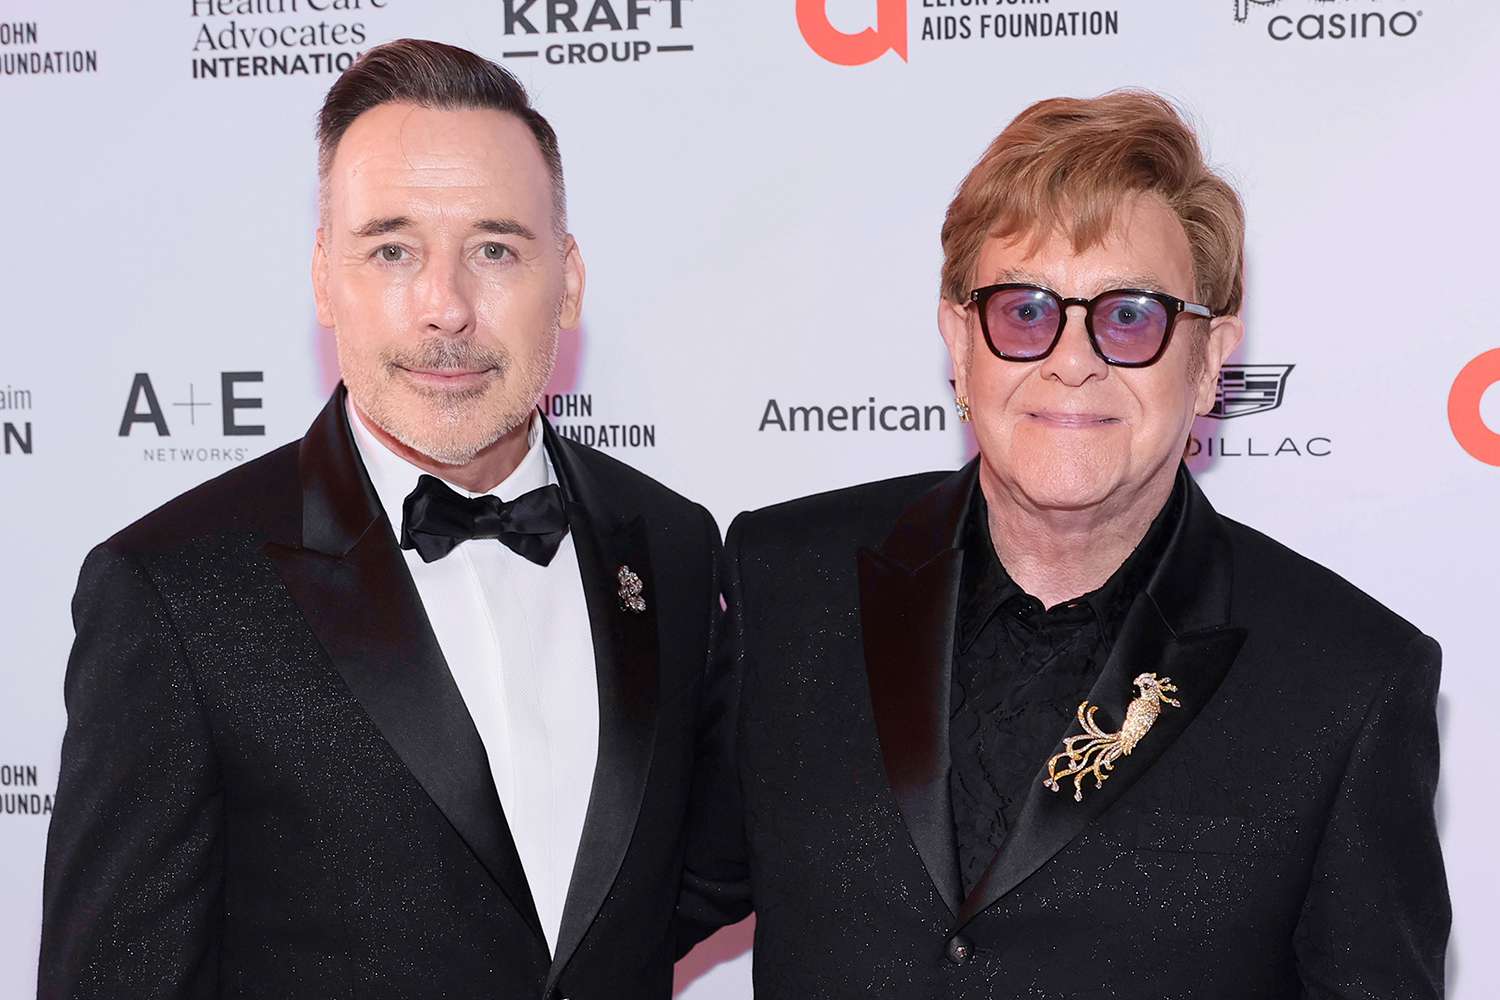 Elton John Confirms He’ll Never Tour Again, Wants to ‘Be Present’ for ‘Key Decade’ in Sons’ Lives